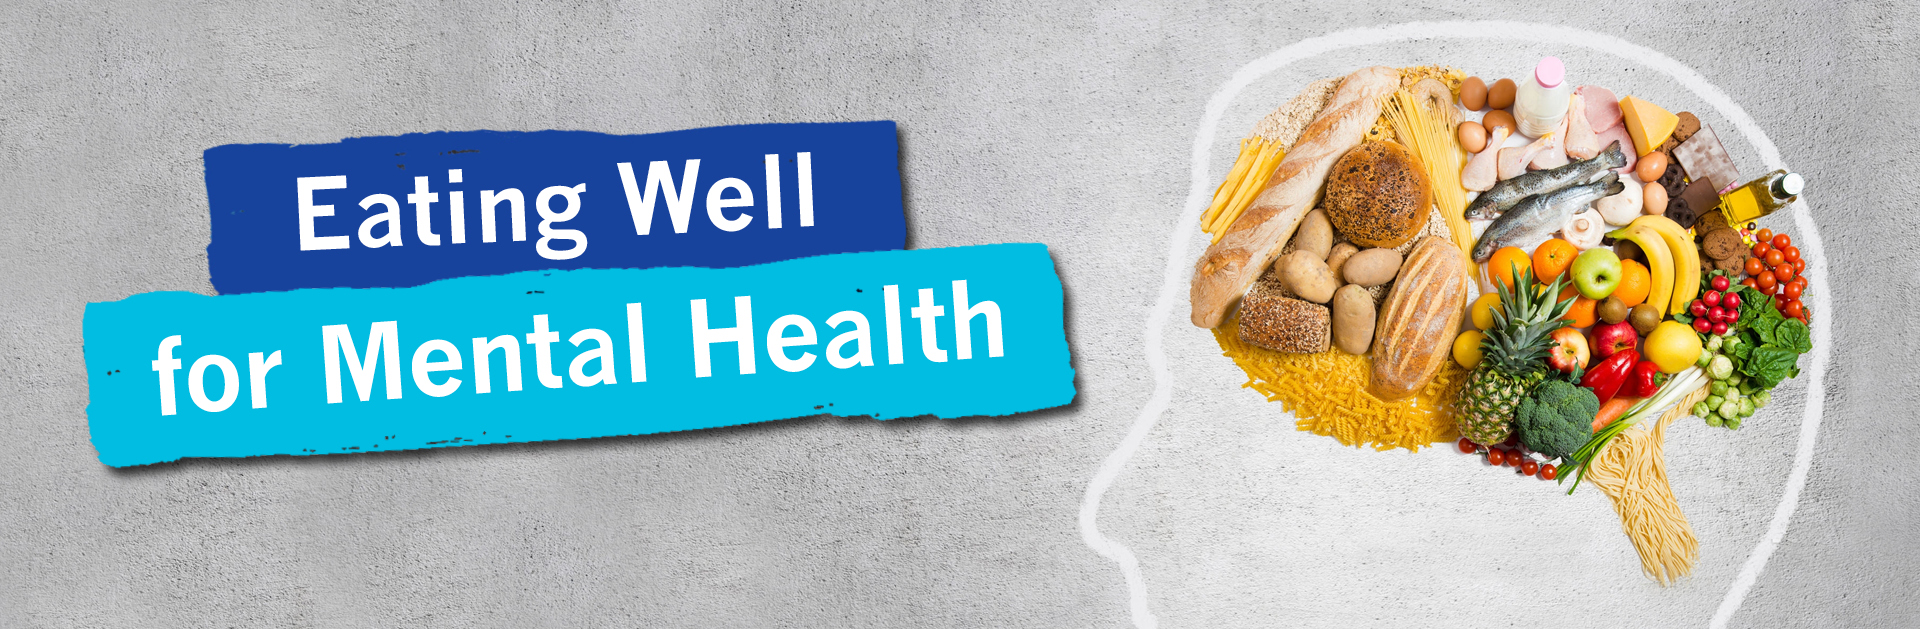 Eating Well for Mental Health